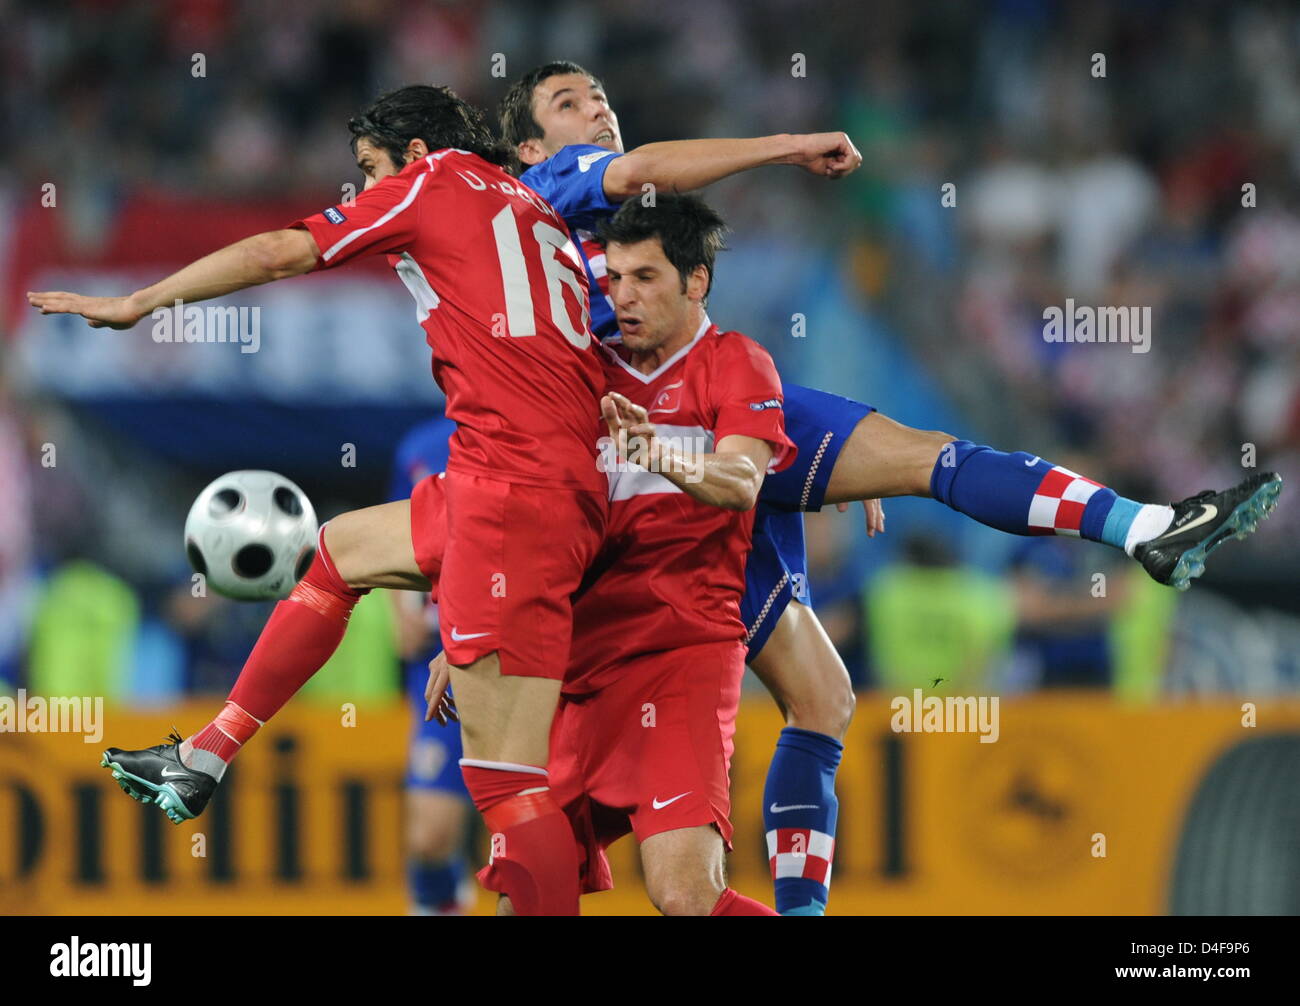 Darijo Srna (back) of Croatia vies with Ugur Boral (L) and Hakan Balta (R) of Turkey during the UEFA EURO 2008 quarter final match between Croatia and Turkey at the Ernst Happel stadium in Vienna, Austria, 20 June 2008. Photo: Achim Scheidemann dpa +please note UEFA restrictions particulary in regard to slide shows and 'No Mobile Services'+ +++(c) dpa - Bildfunk+++ Stock Photo